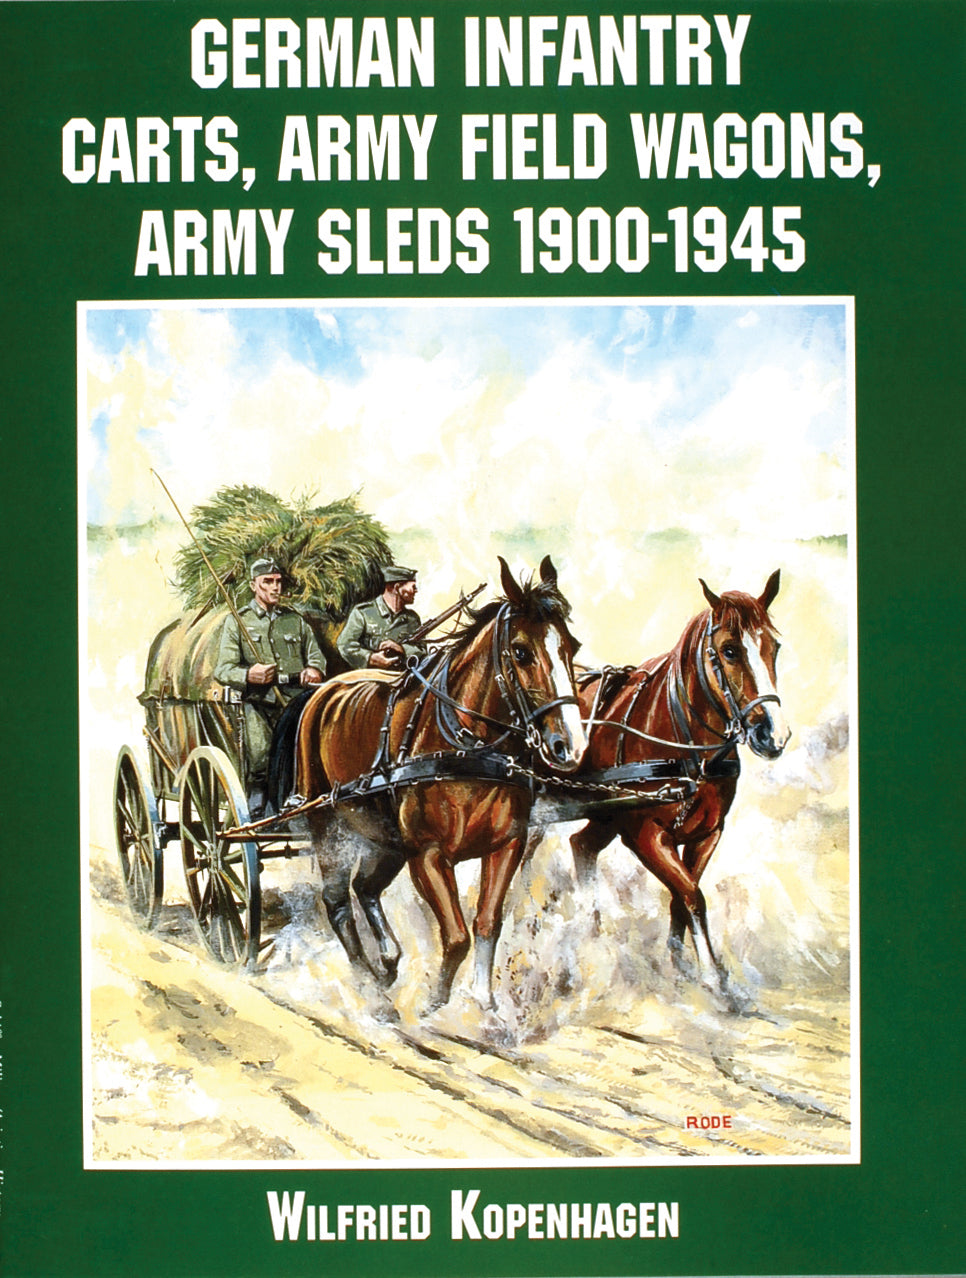 German Infantry Carts, Army Field Wagons, Army Sleds 1900-1945